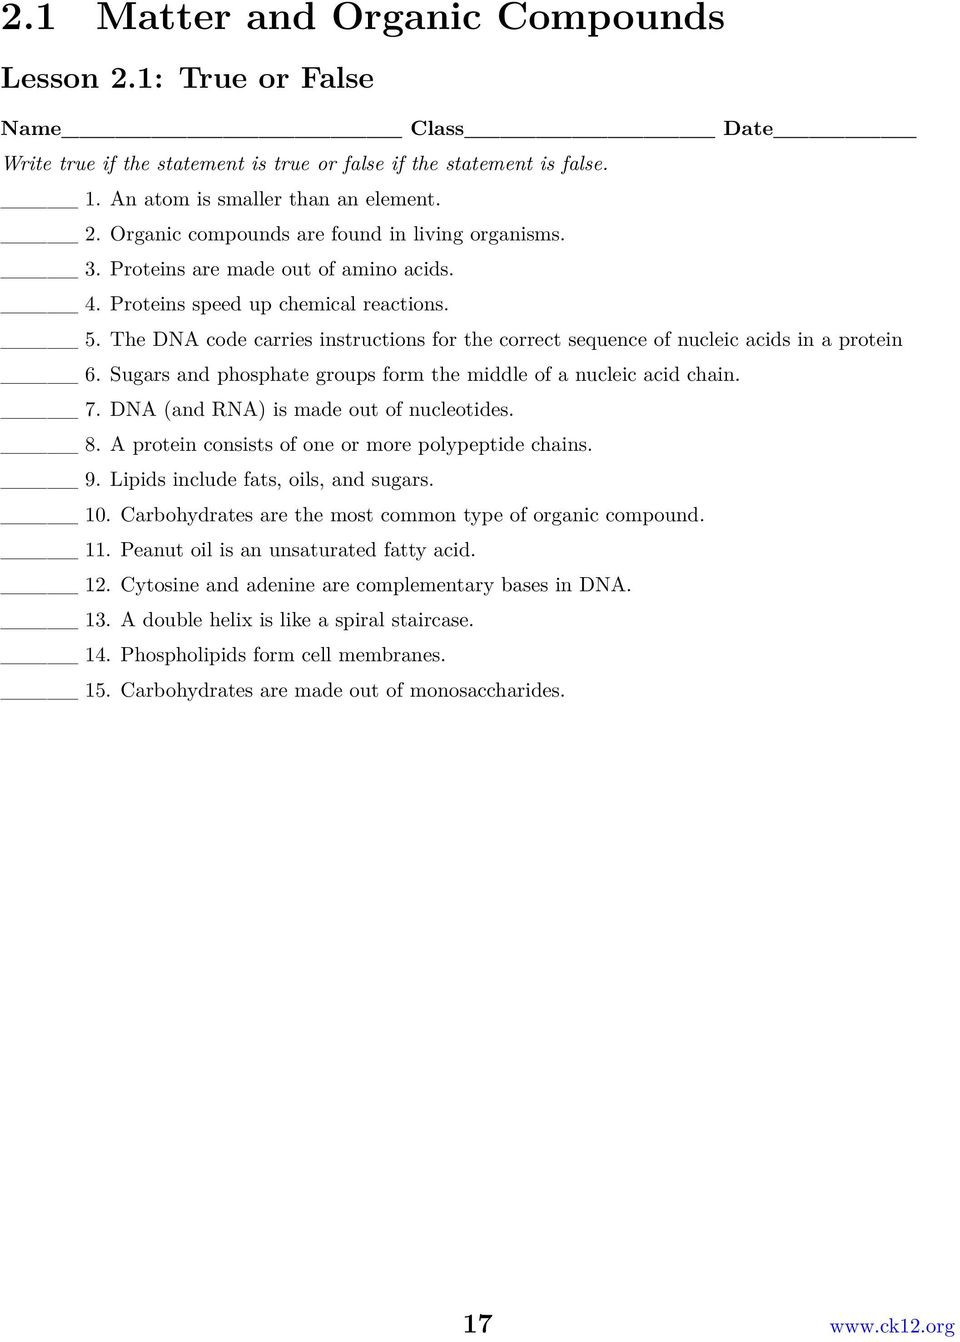 Chemistry Of Life Worksheet Chapter 2 the Chemistry Of Life Worksheets Pdf Free Download